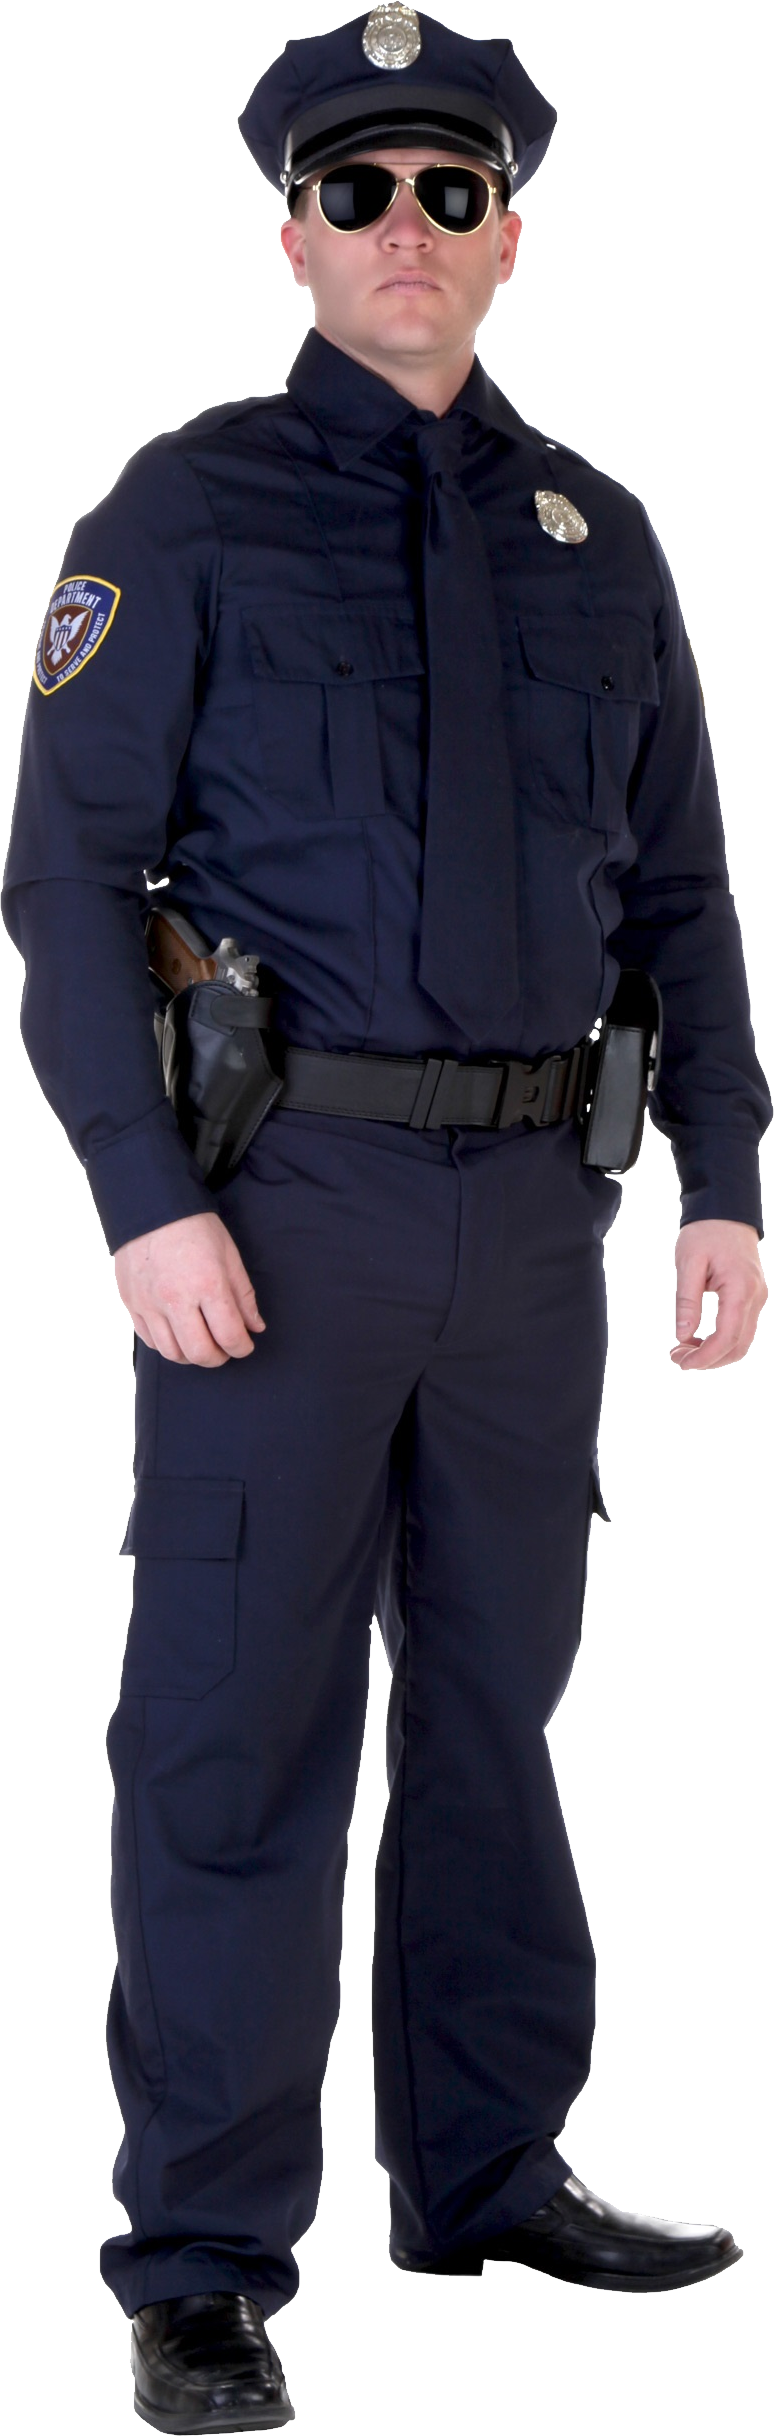 Policeman PNG Image Background